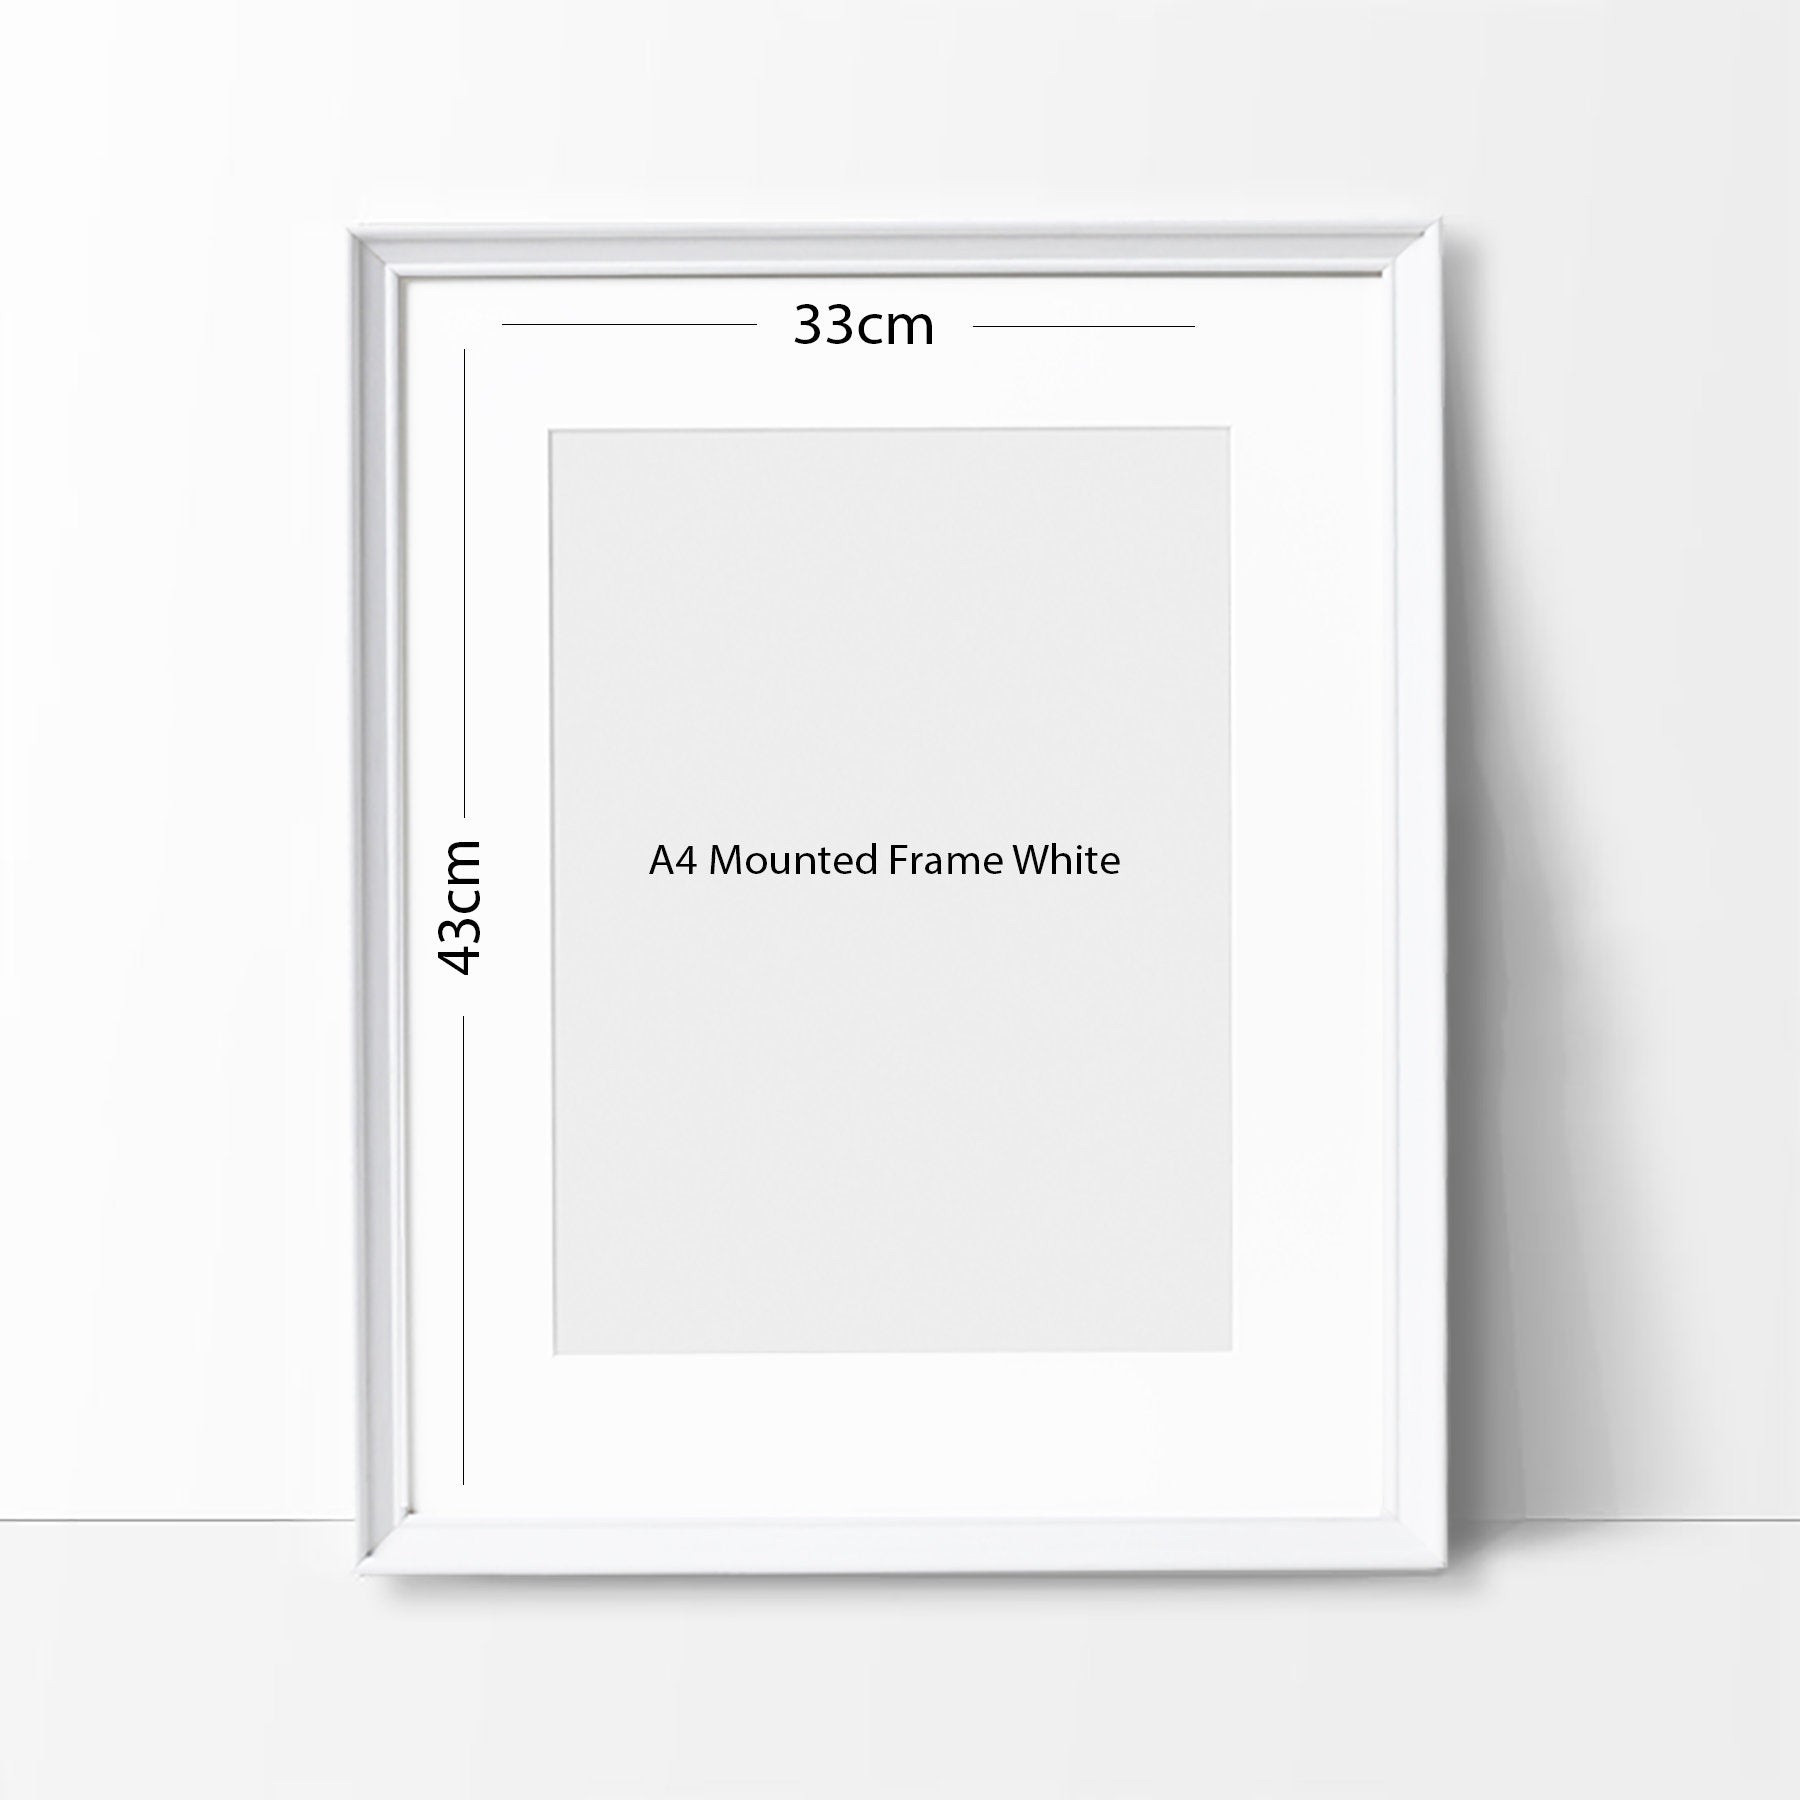 Schumi | Minimalist Watercolor Art Print Poster Gift Idea For Him Or Her | F1